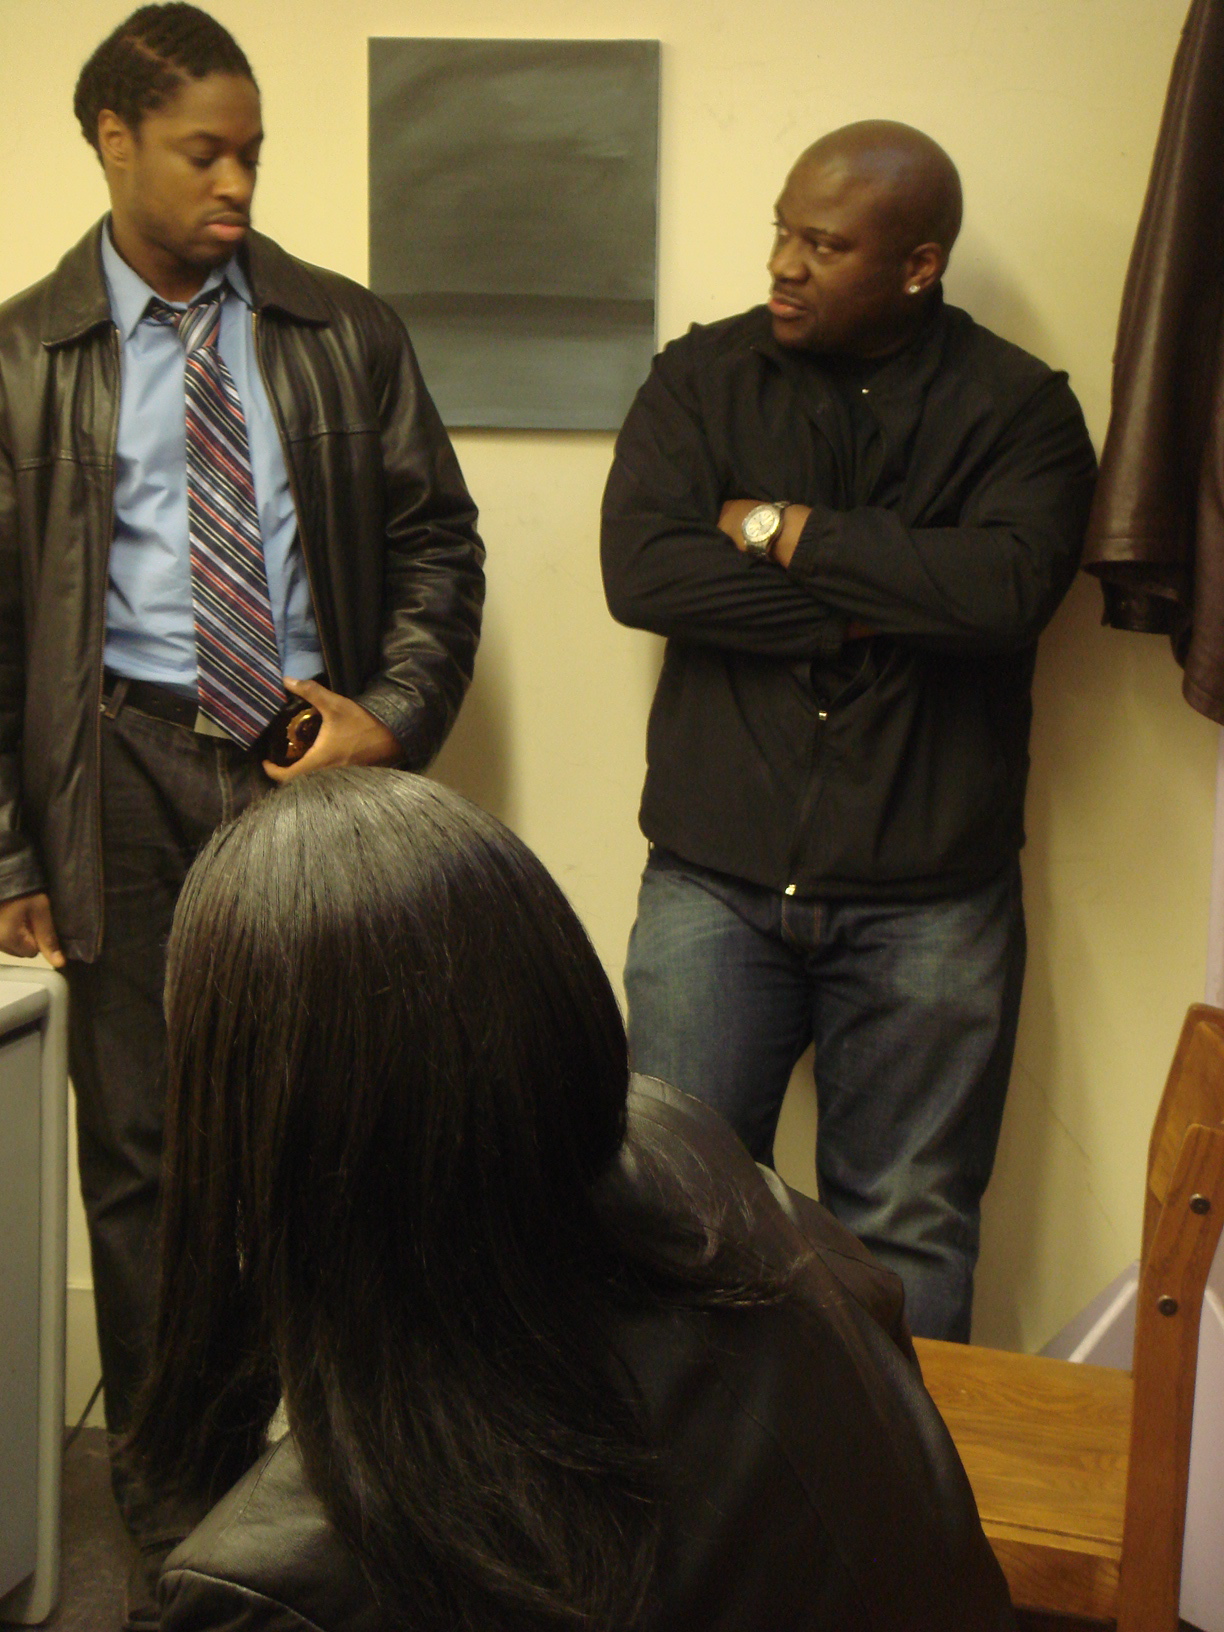 Tony Clomax directs actors Jarrett Alexander and Angela Watson in an emotional scene from MBK: My Brother's Keeper.